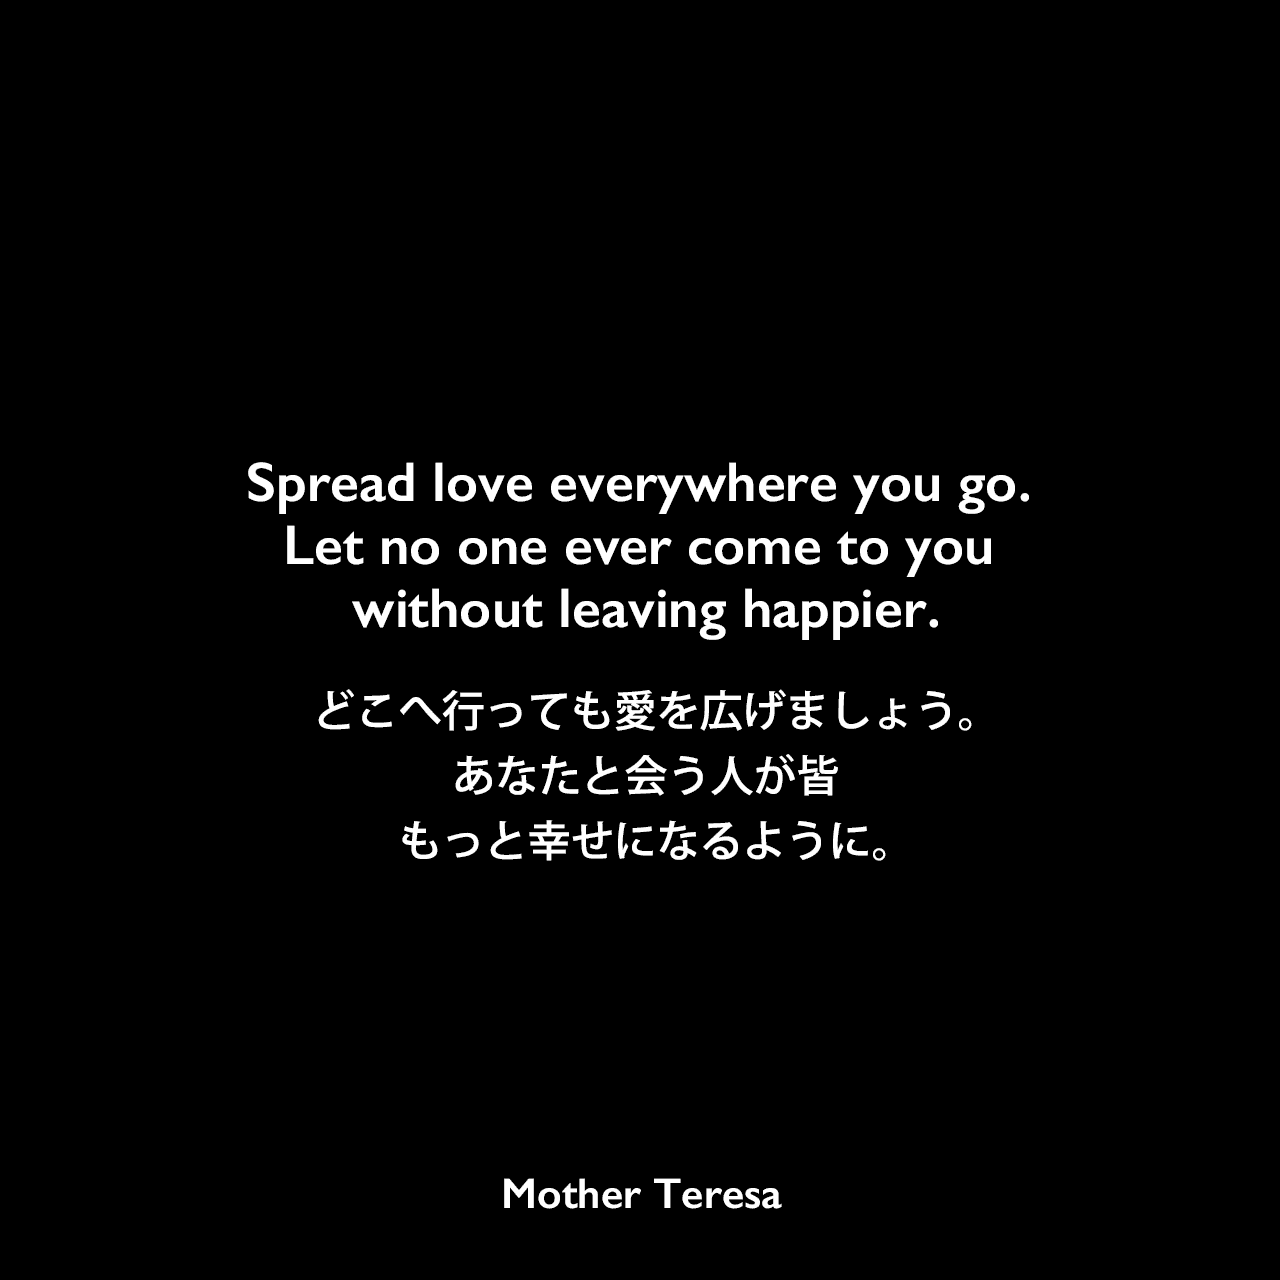 Spread love everywhere you go. Let no one ever come to you without leaving happier.どこへ行っても愛を広げましょう。あなたと会う人が皆もっと幸せになるように。Mother Teresa